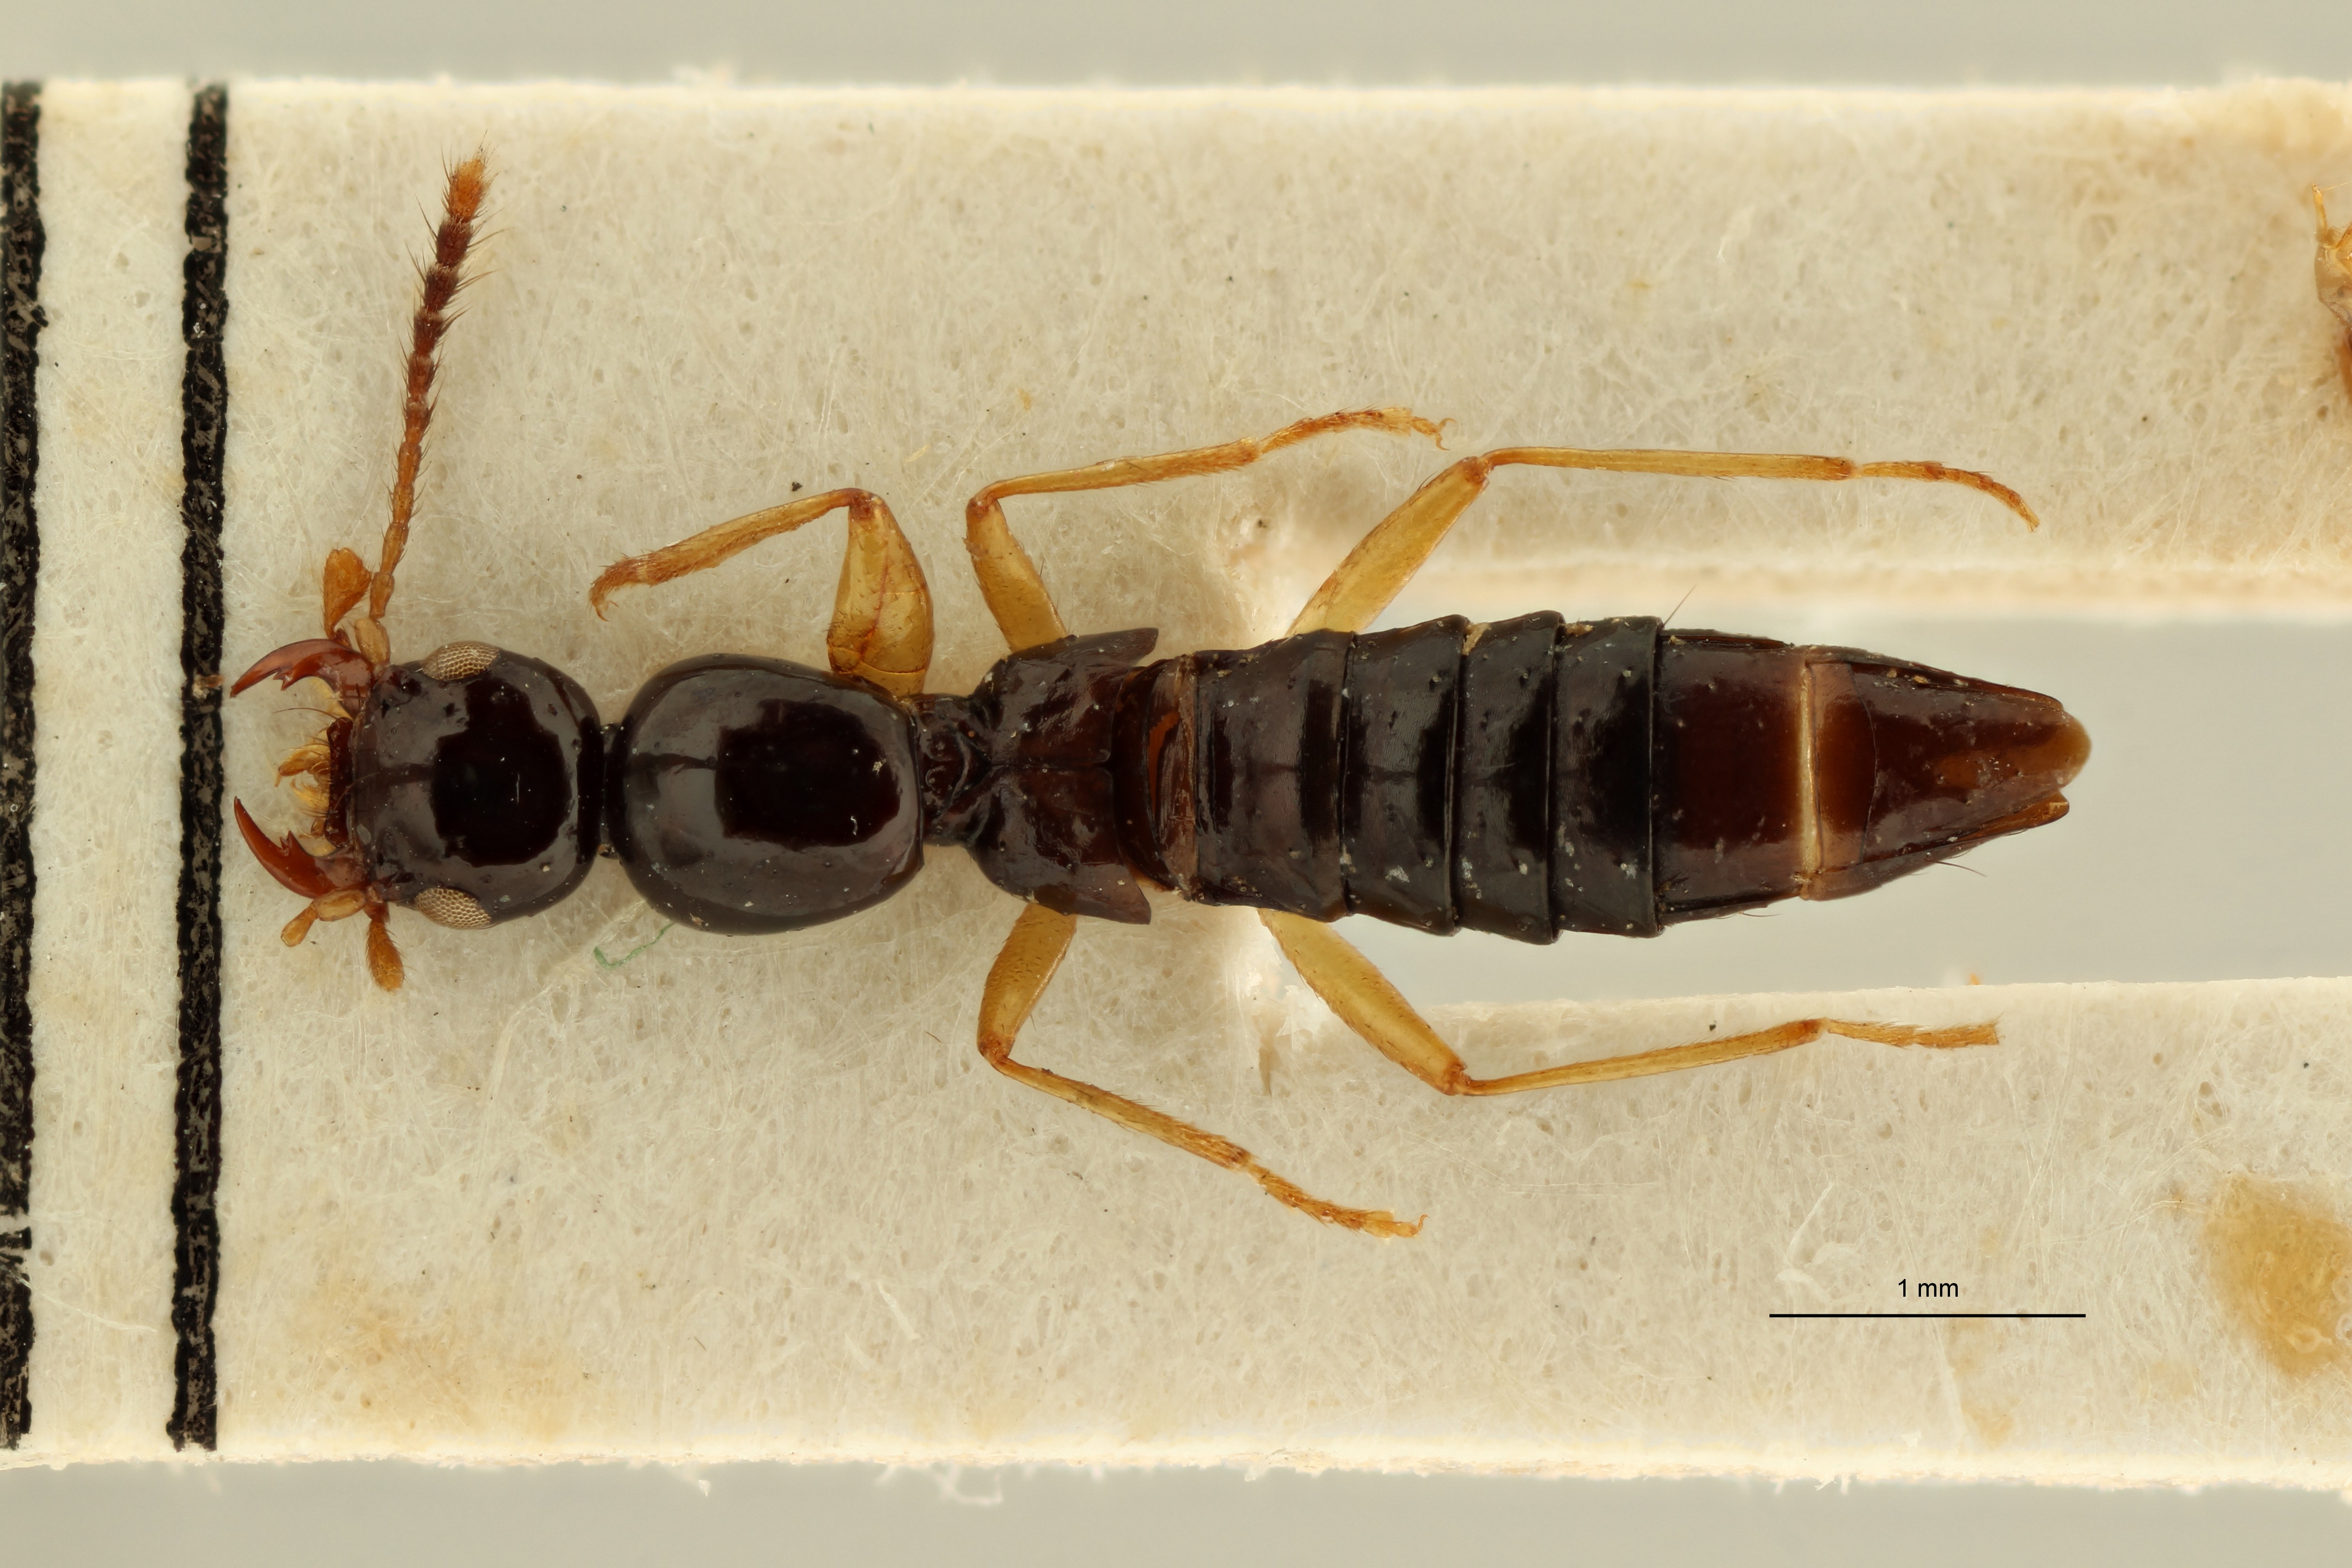 Madecapaederus dilutipes t D ZS PMax Scaled.jpeg